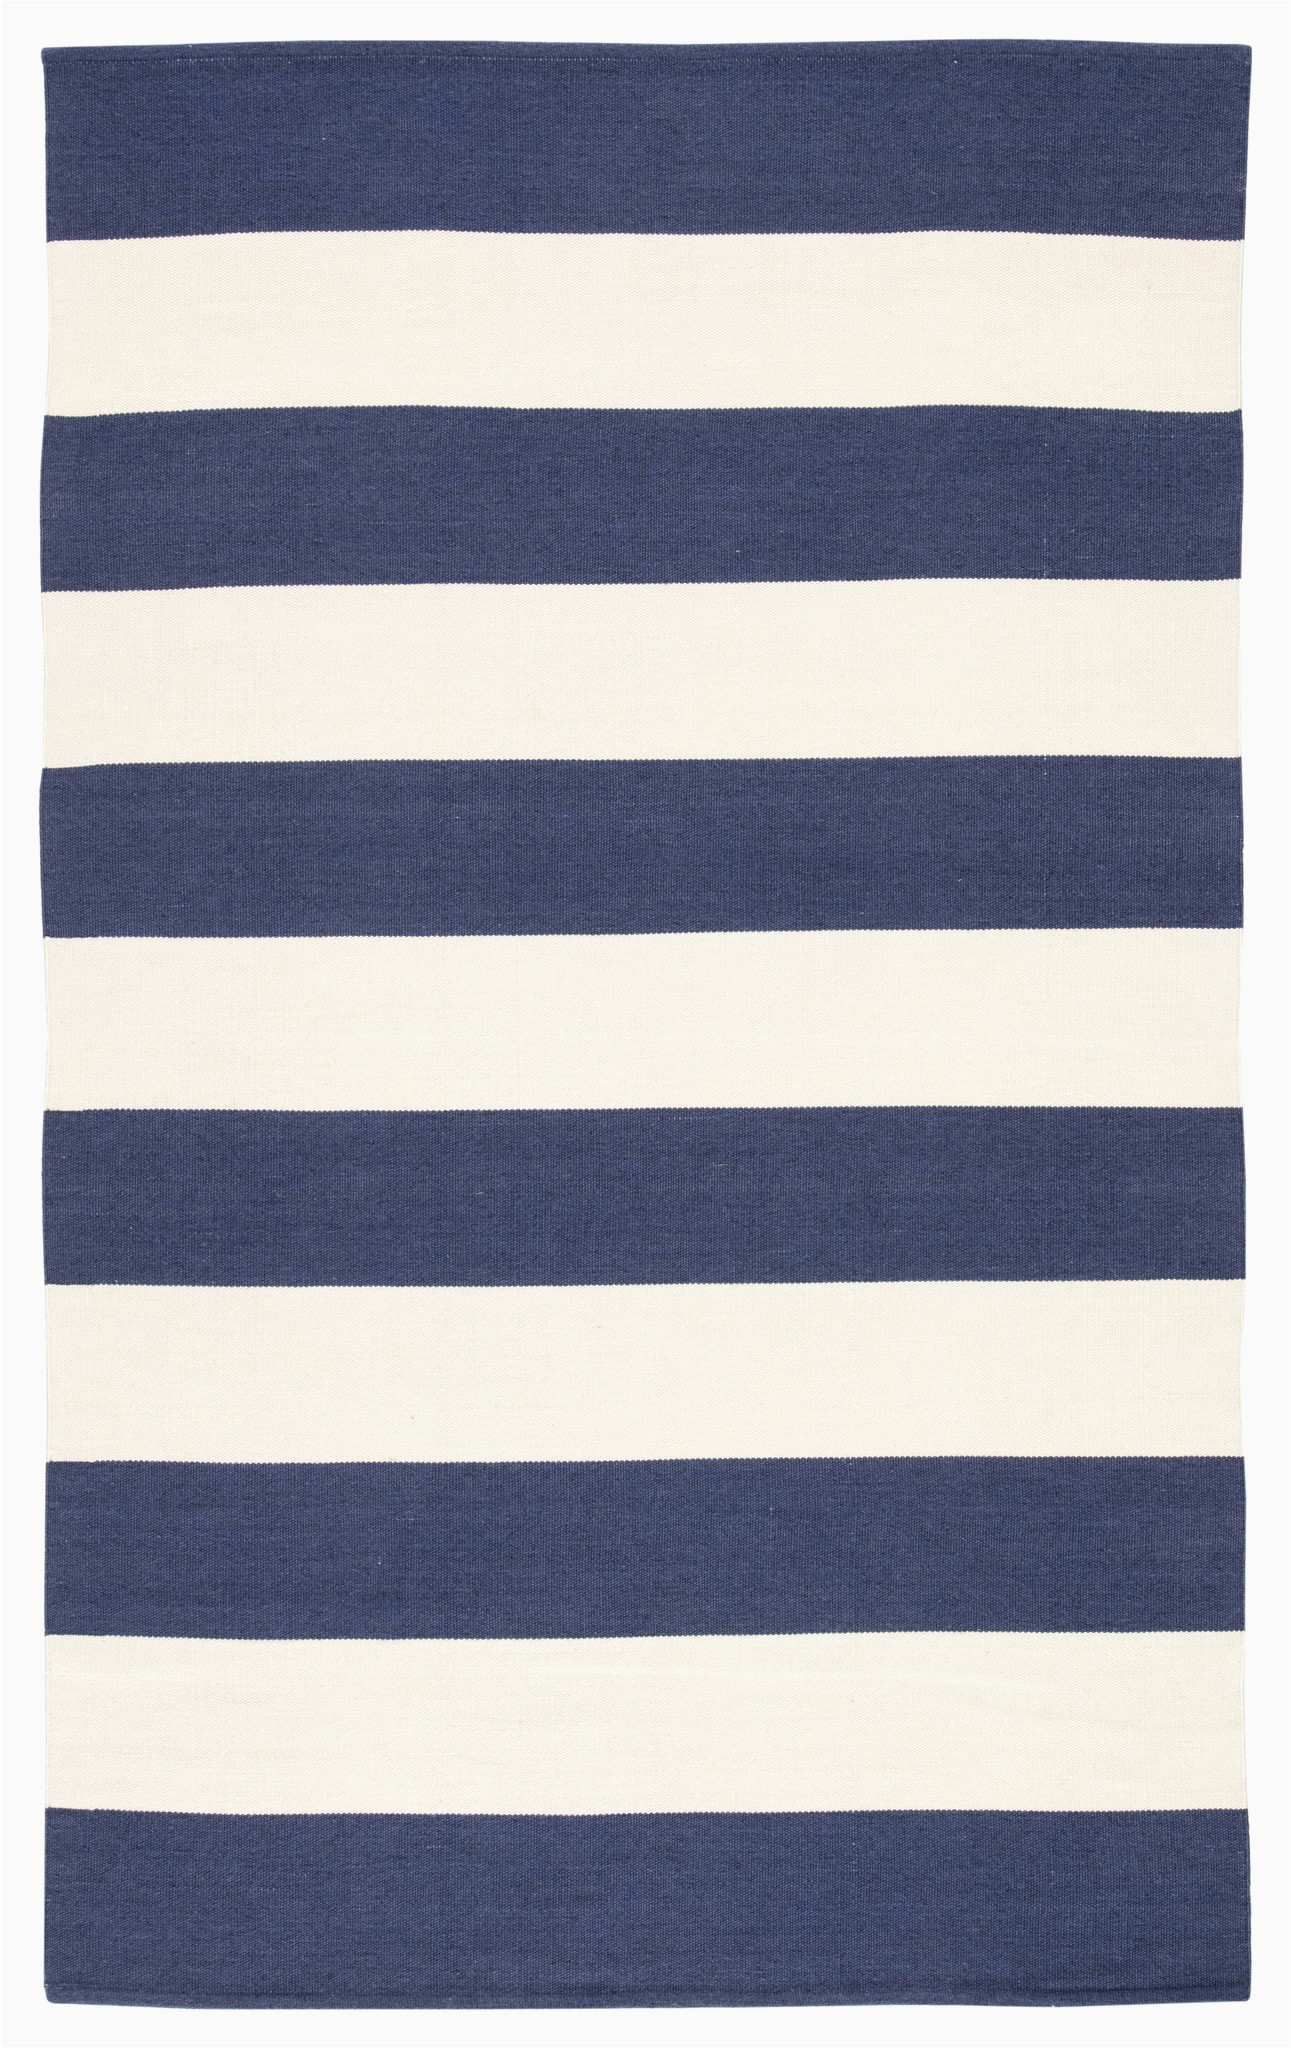 Navy Blue and White Striped Rug Remora Navy Blue Striped Rug